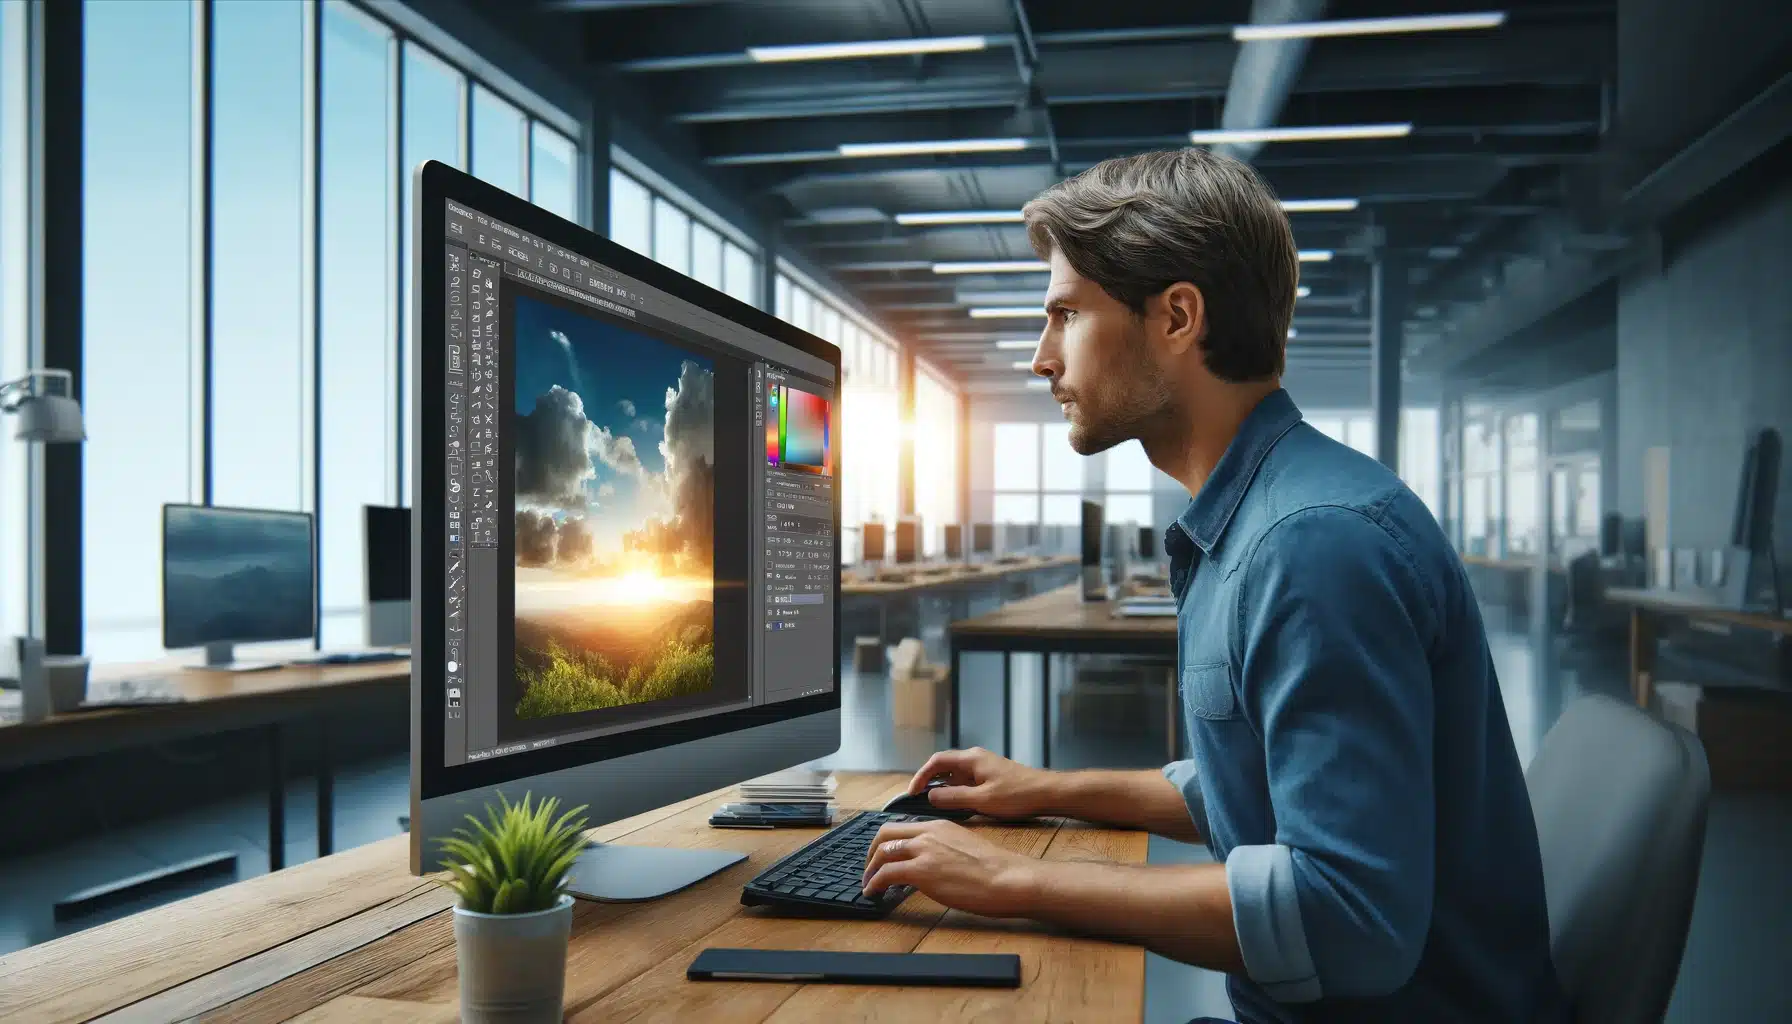 A graphic designer working on a desktop computer, editing a landscape photo to replace the sky, in a modern, well-lit office.